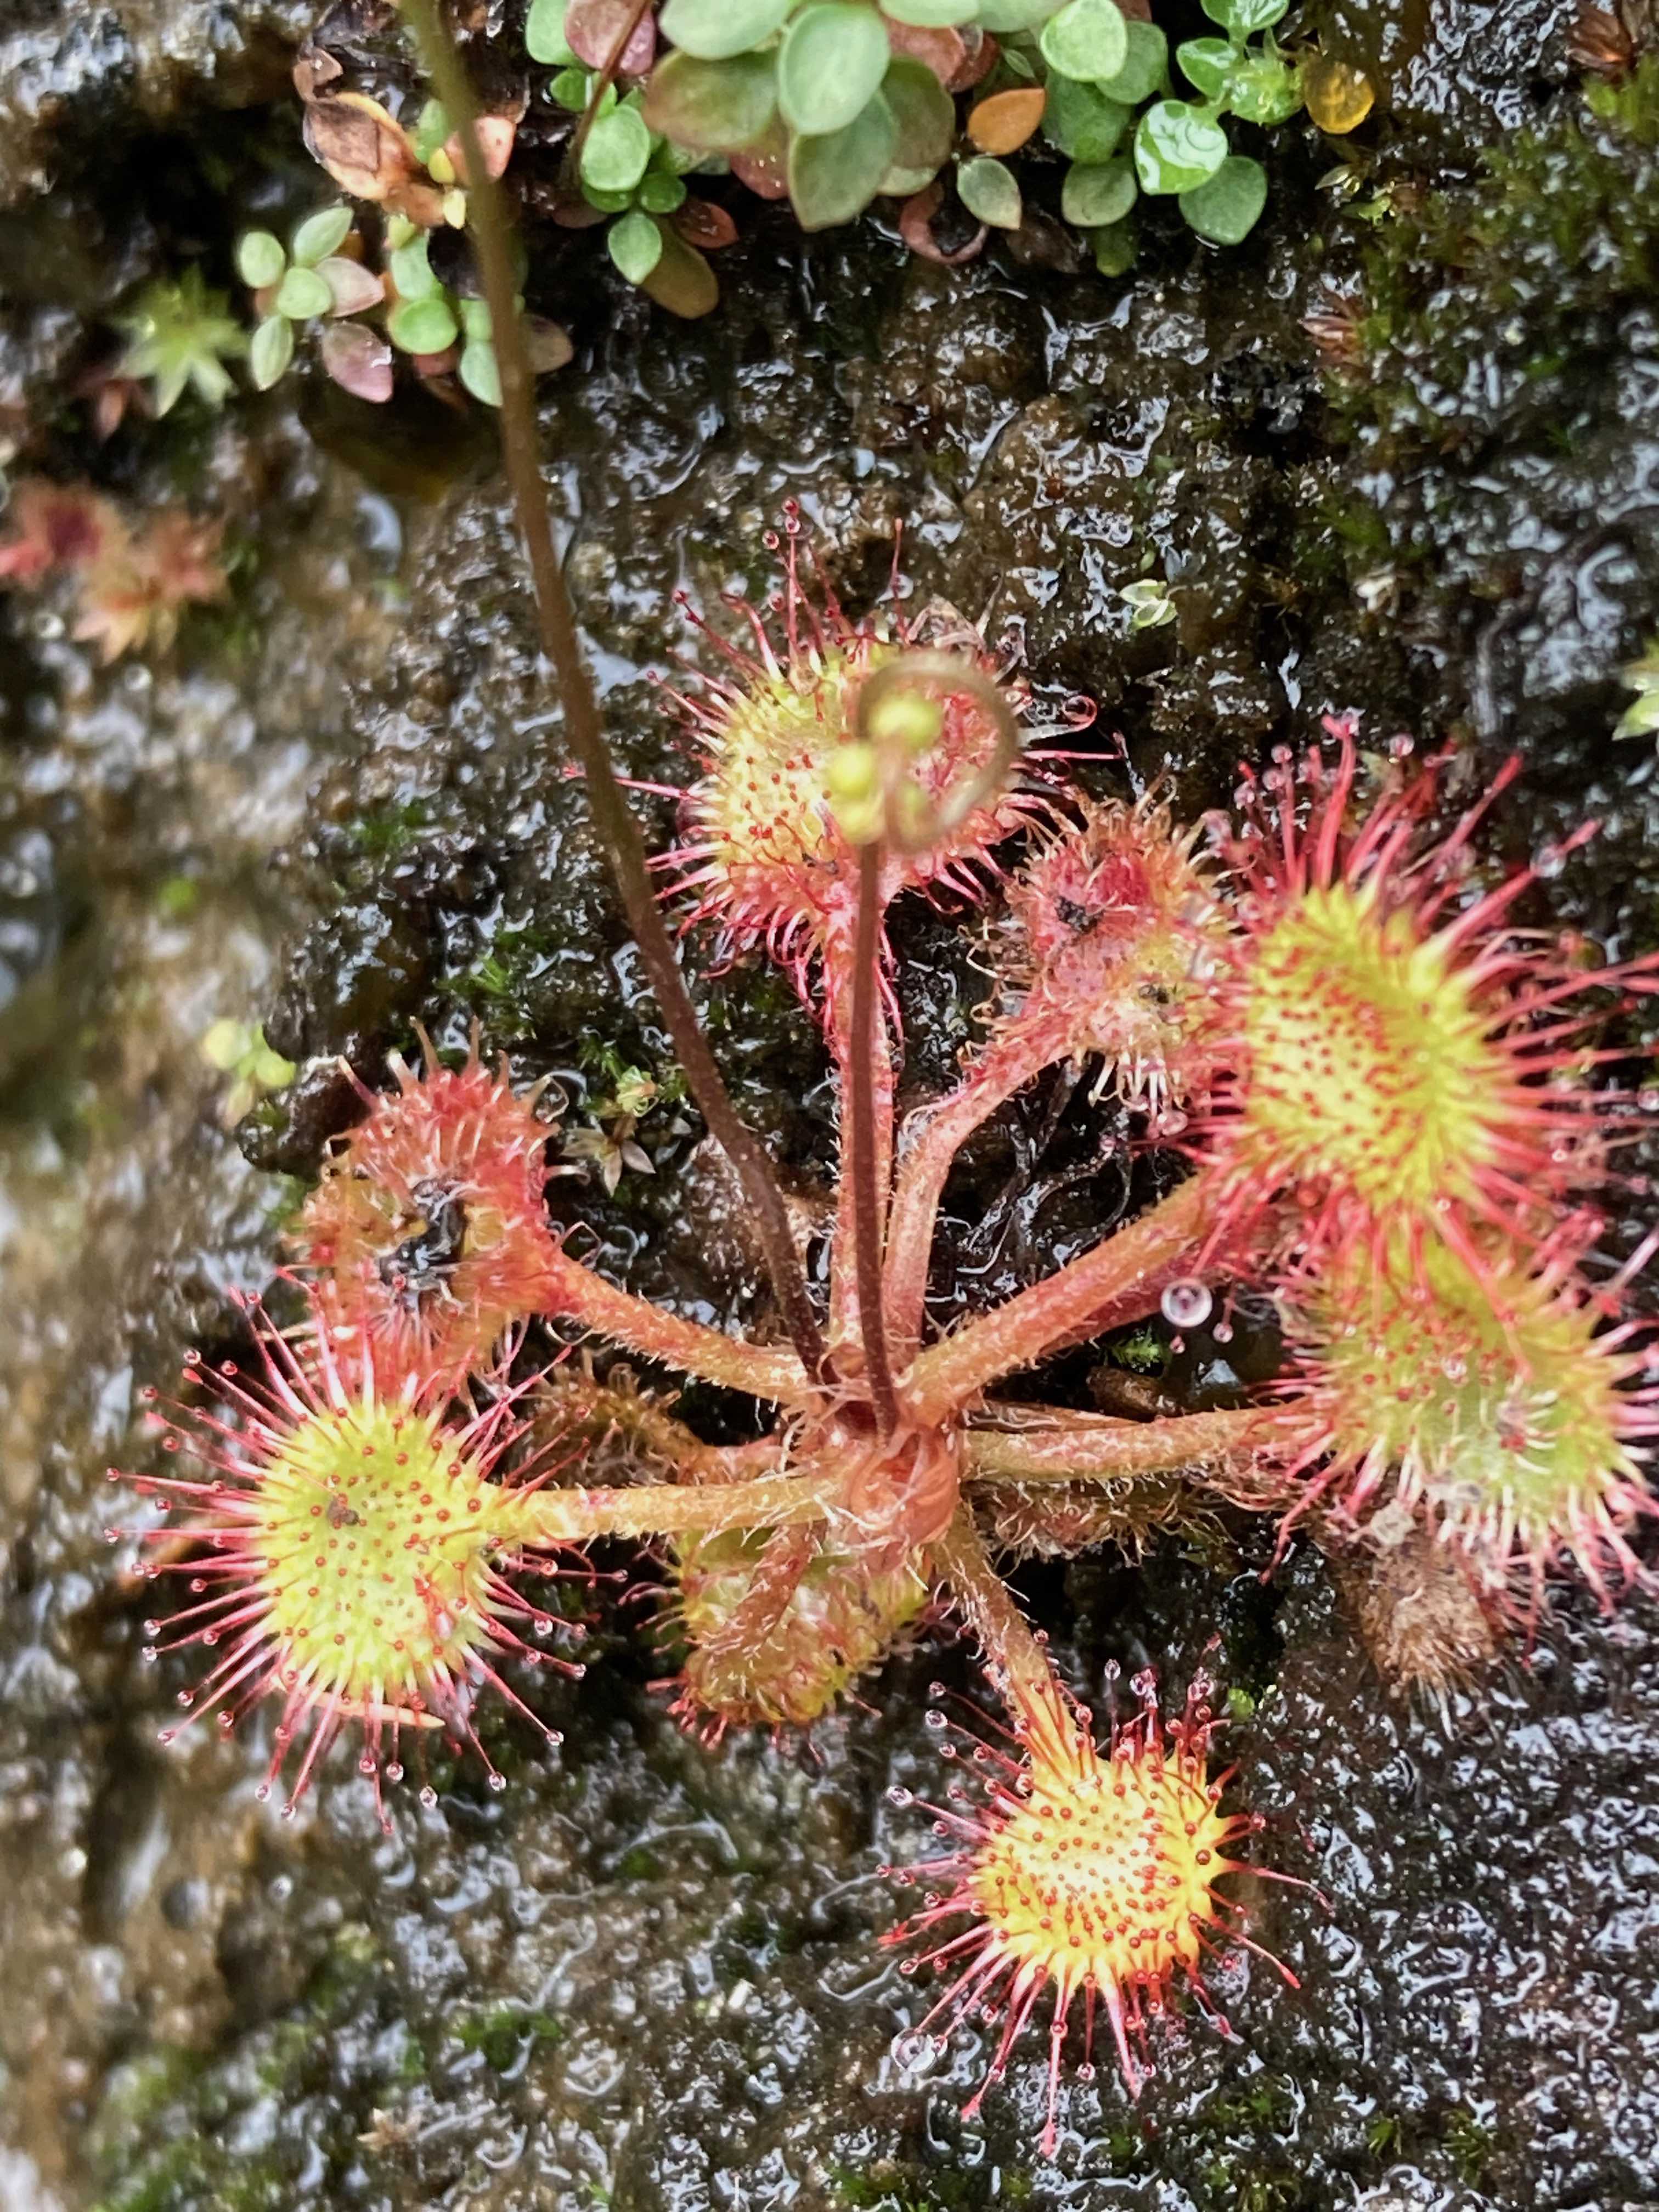 The Scientific Name is Drosera rotundifolia. You will likely hear them called Roundleaf Sundew. This picture shows the  Has a rosette of glandular leaves that spread horizontally or diagonally from a central node of Drosera rotundifolia